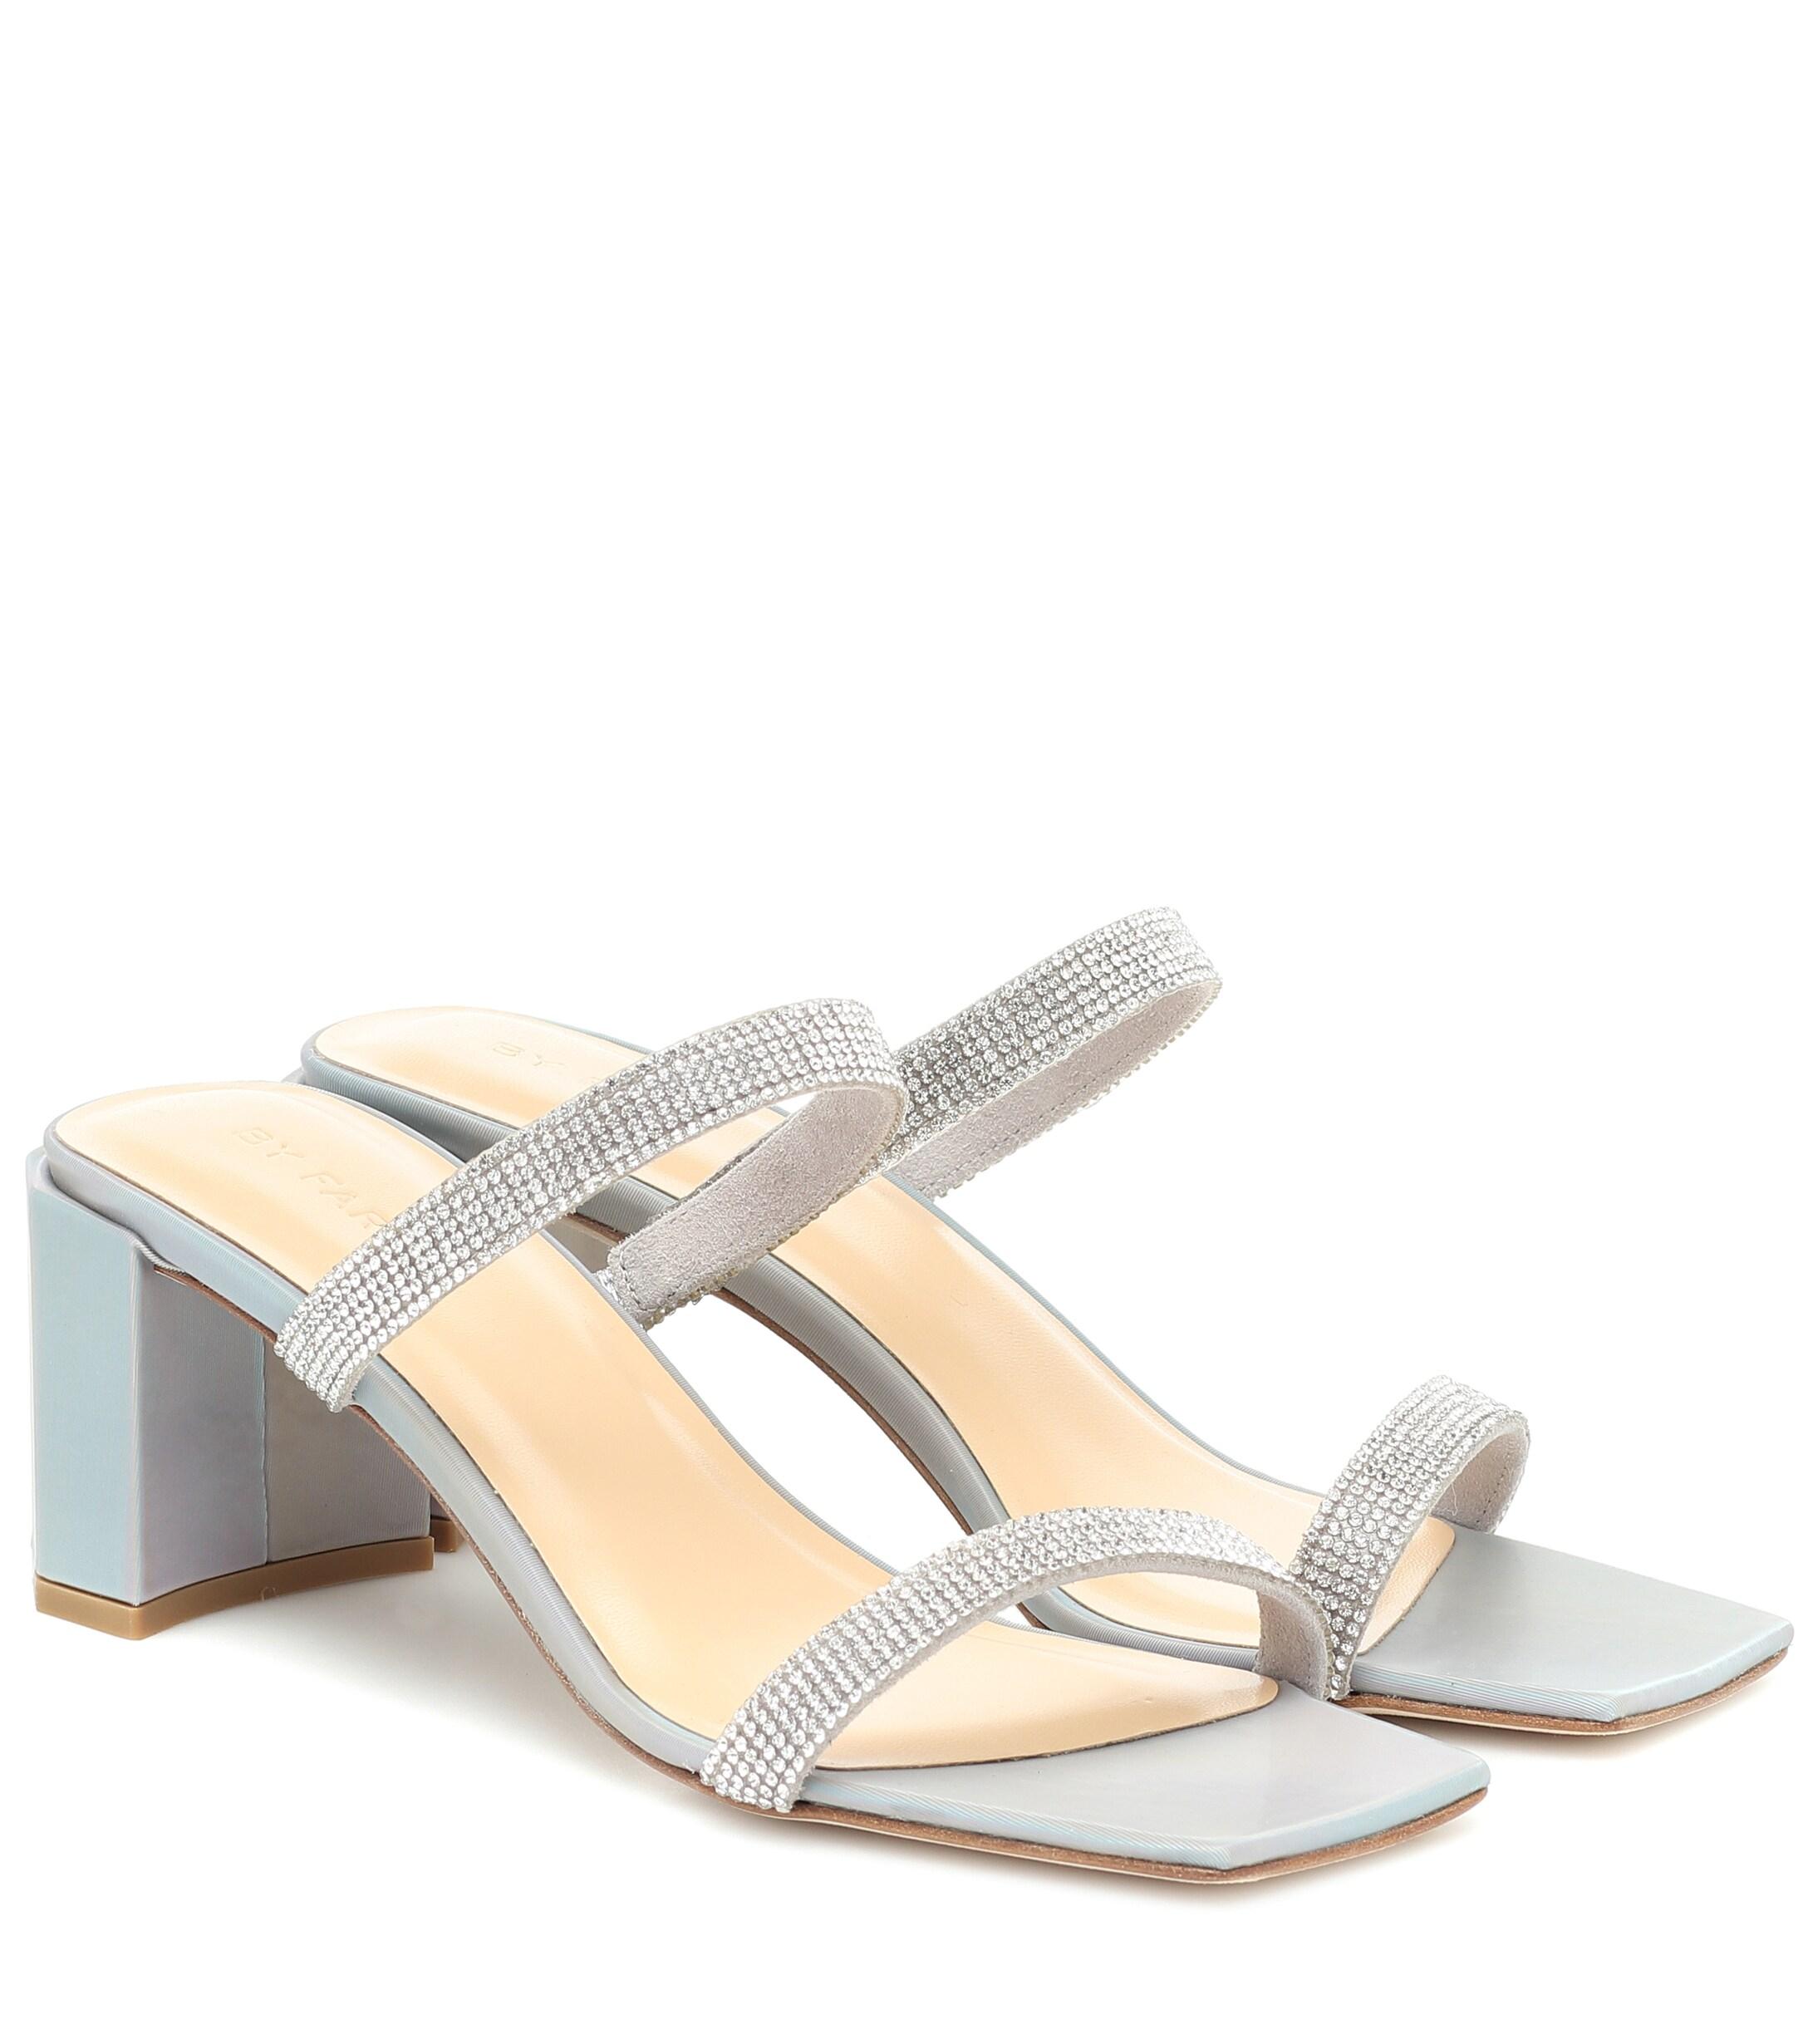 BY FAR Tanya Embellished Leather Sandals in Silver (Metallic) - Lyst